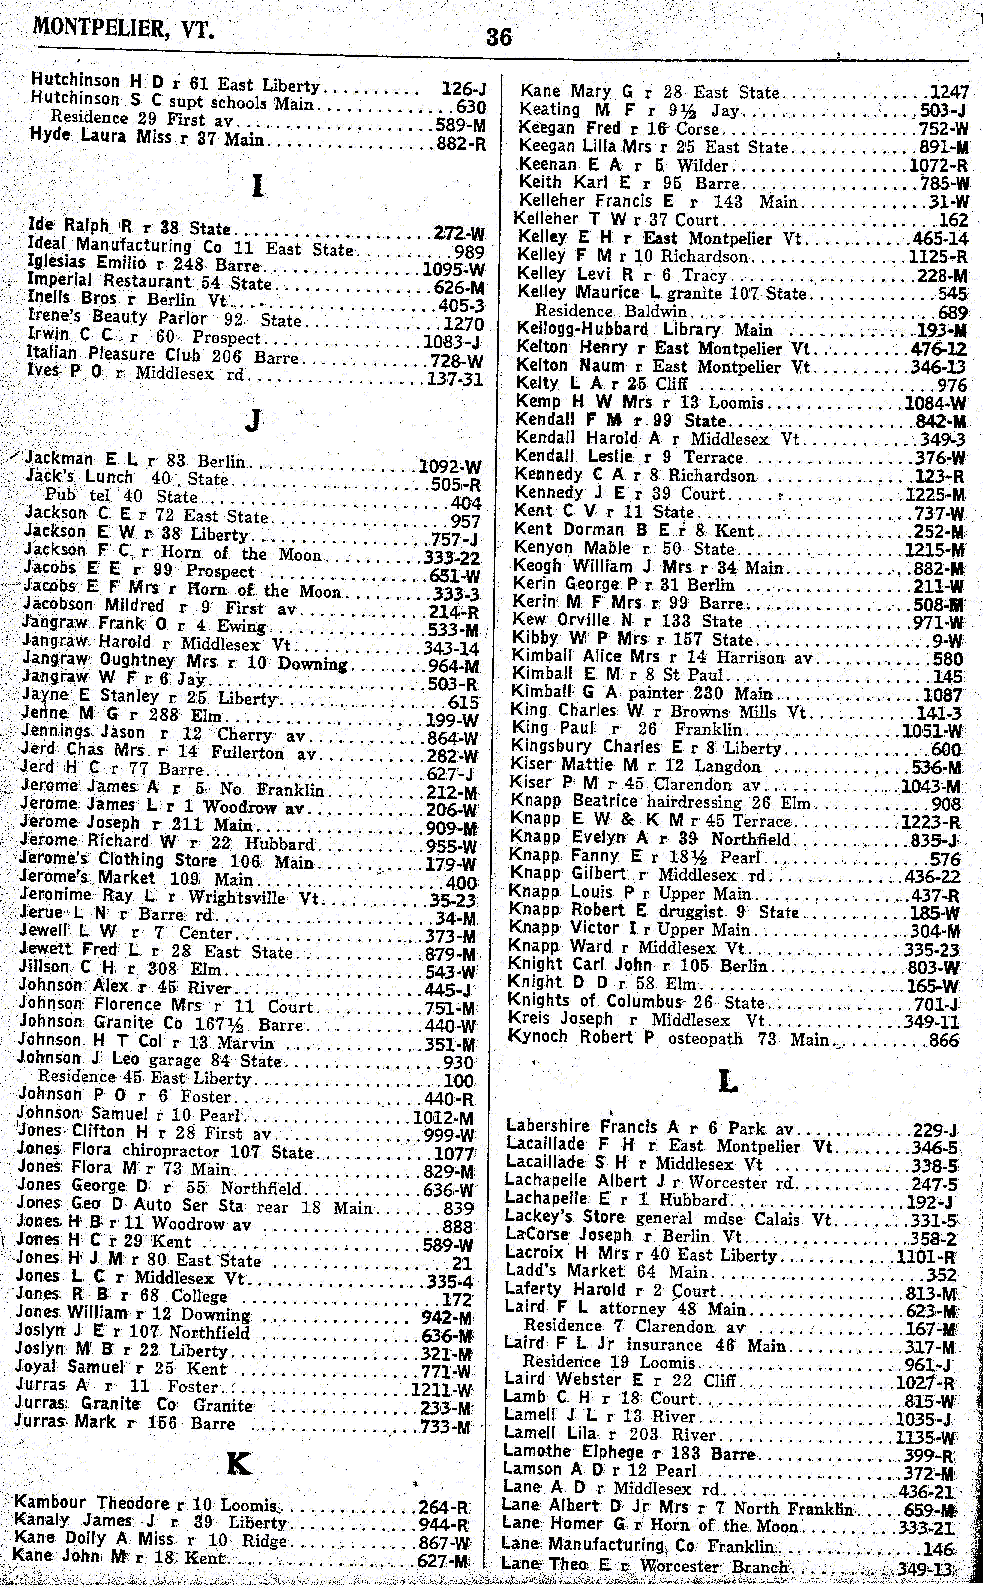 1928 Montpelier Vt Telephone Book - Page 36